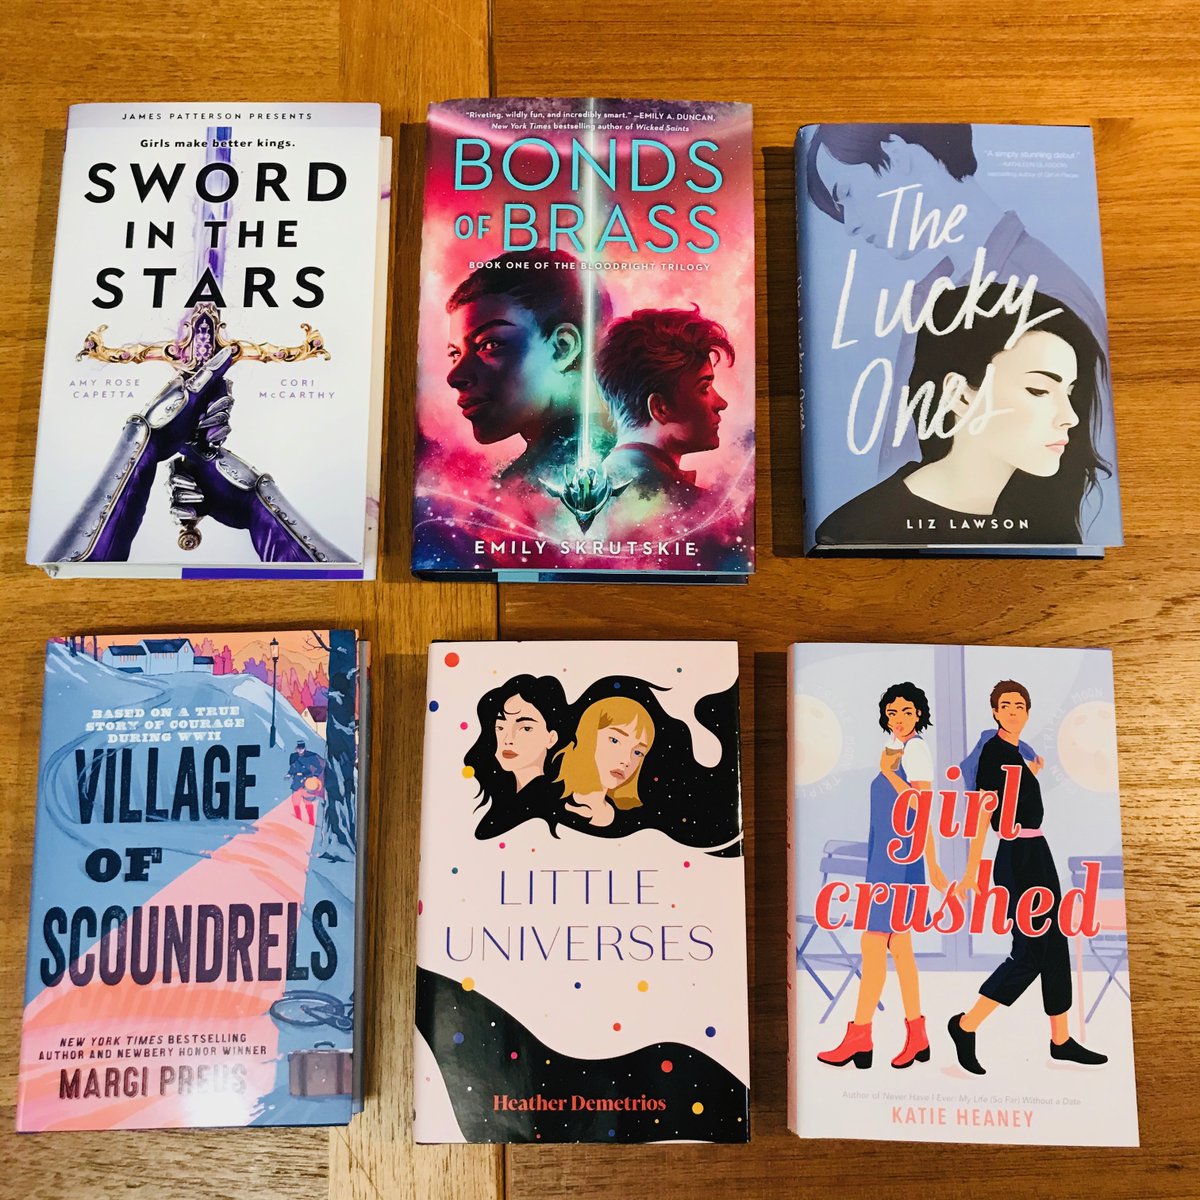 Young adult (and one teen)!SWORD IN THE STARS by  @CoriMcCarthy &  @AmyRoseCapetta!VILLAGE OF SCOUNDRELS by  @MargiPreus!BONDS OF BRASS by  @skrutskie!LITTLE UNIVERSES by  @HDemetrios!THE LUCKY ONES by  @LzLwsn!GIRL CRUSHED by Katie Heaney!